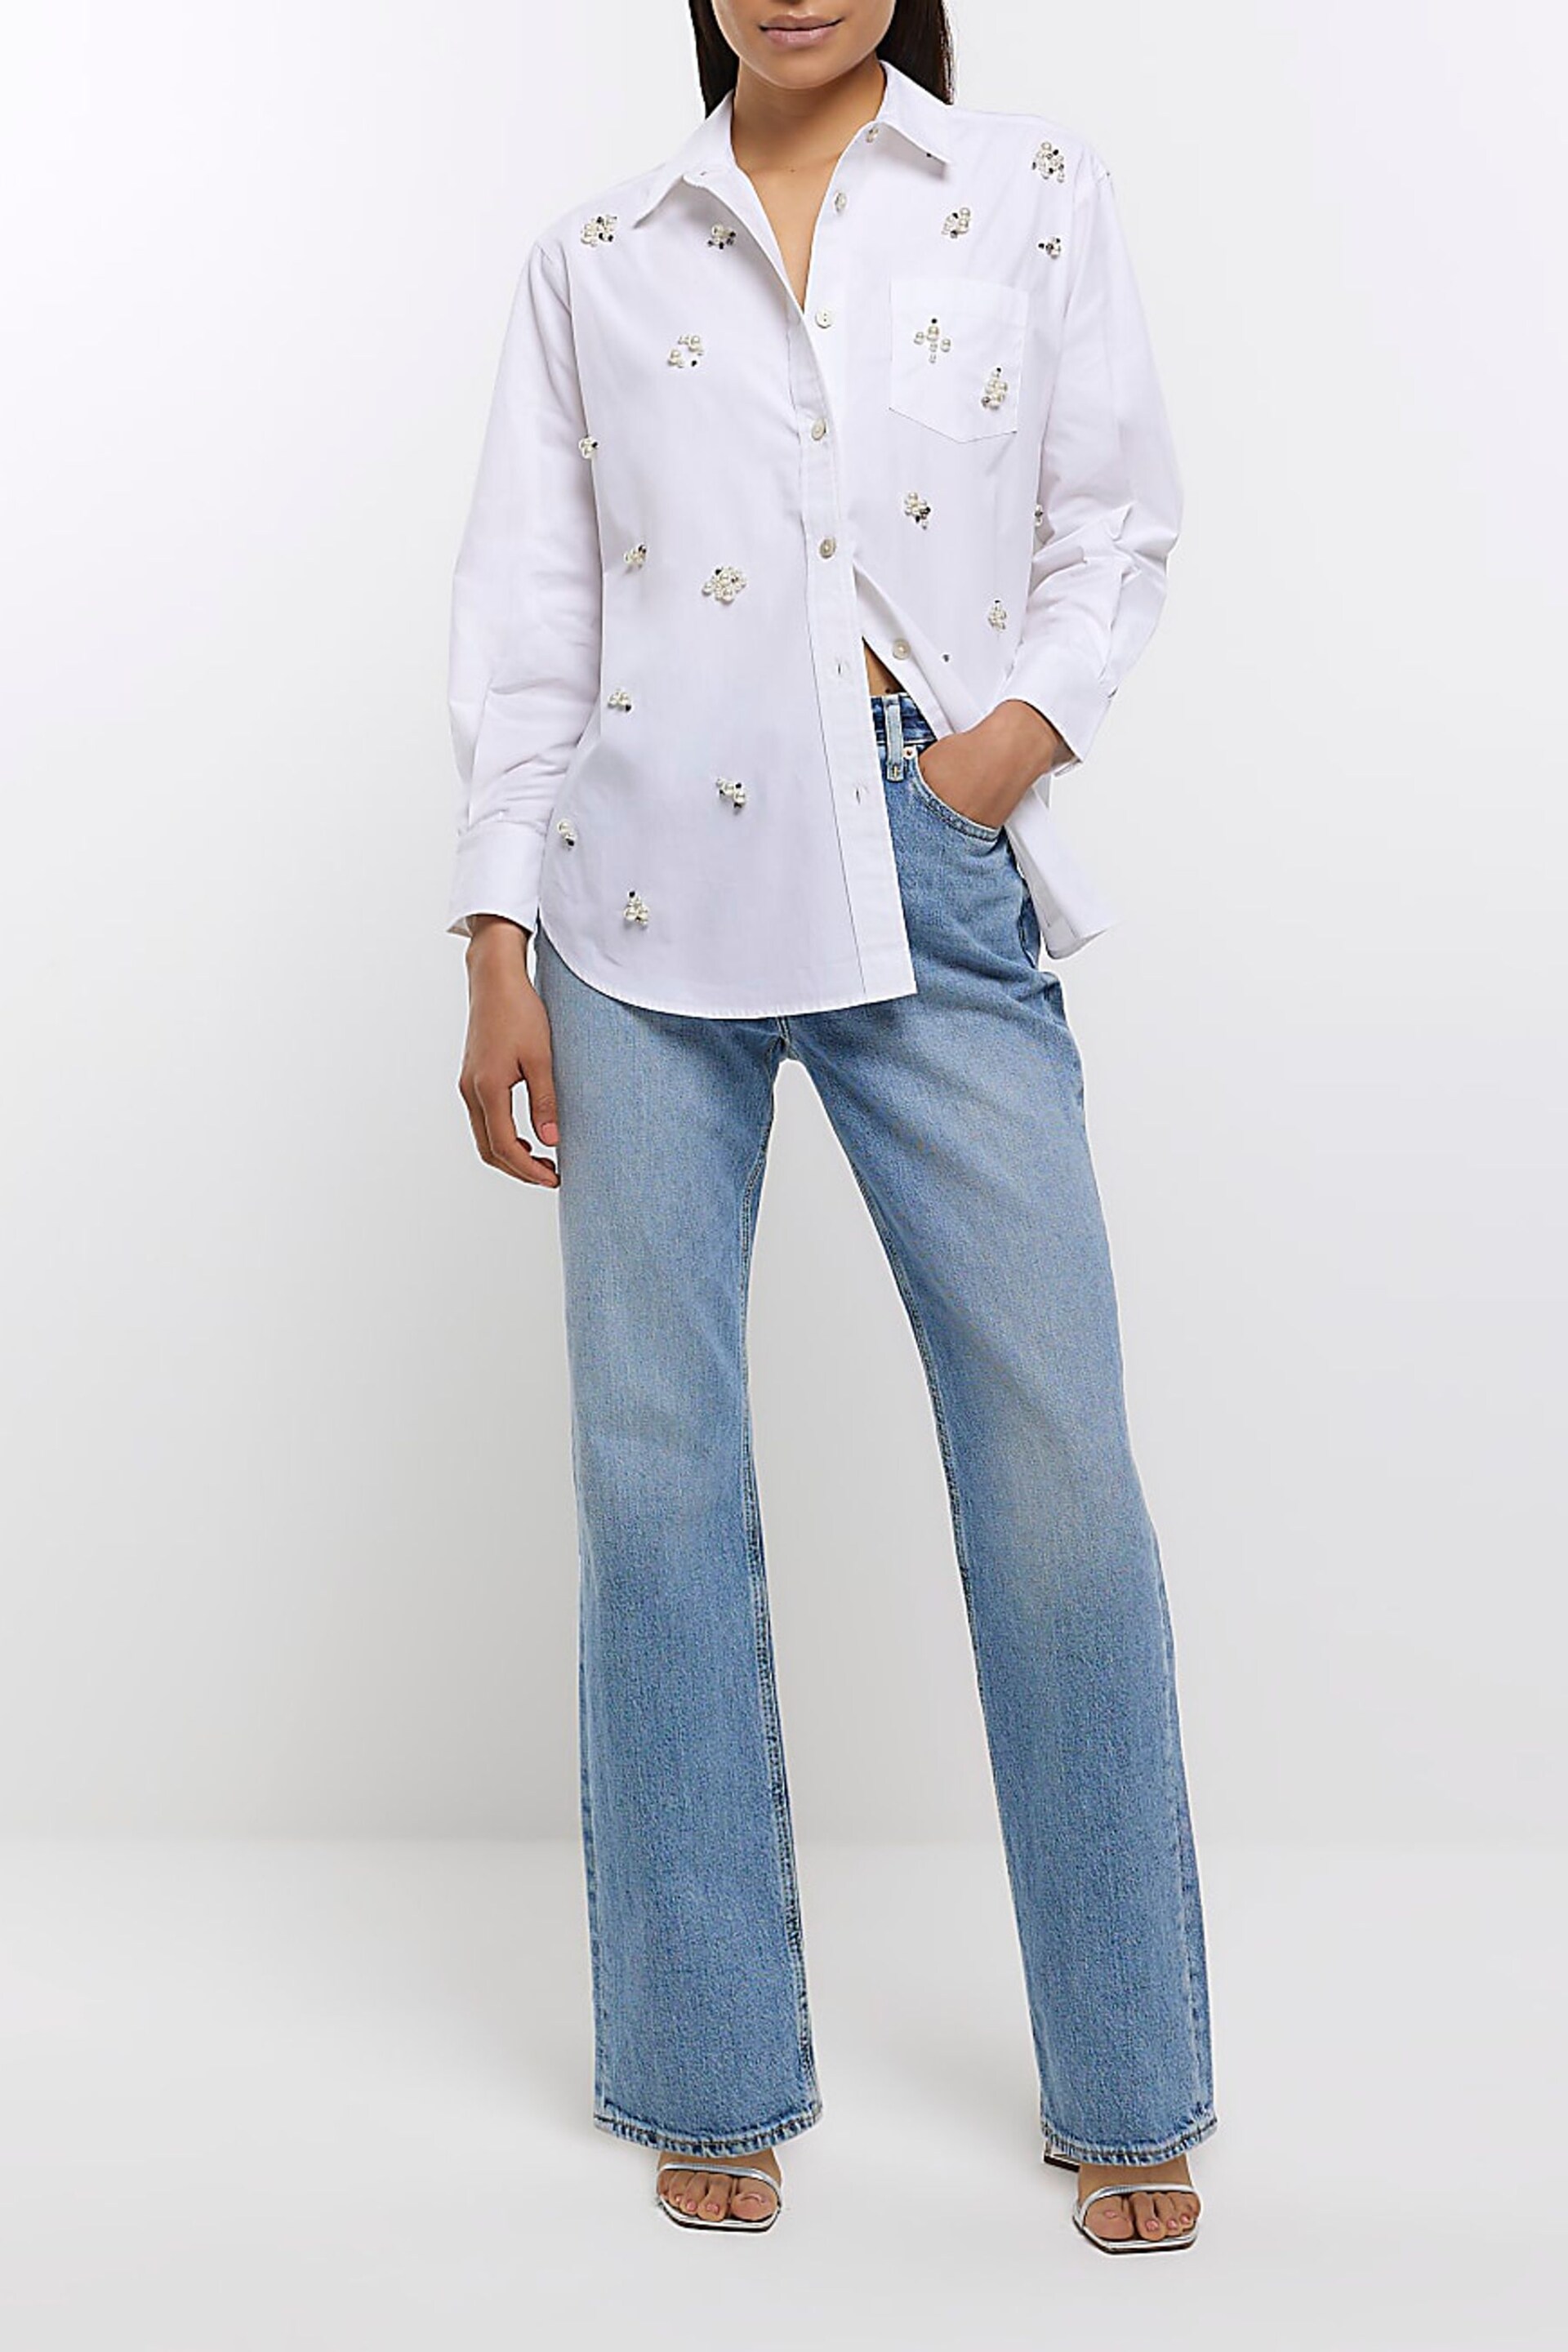 River Island White Embellished Pearl Shirt - Image 3 of 6